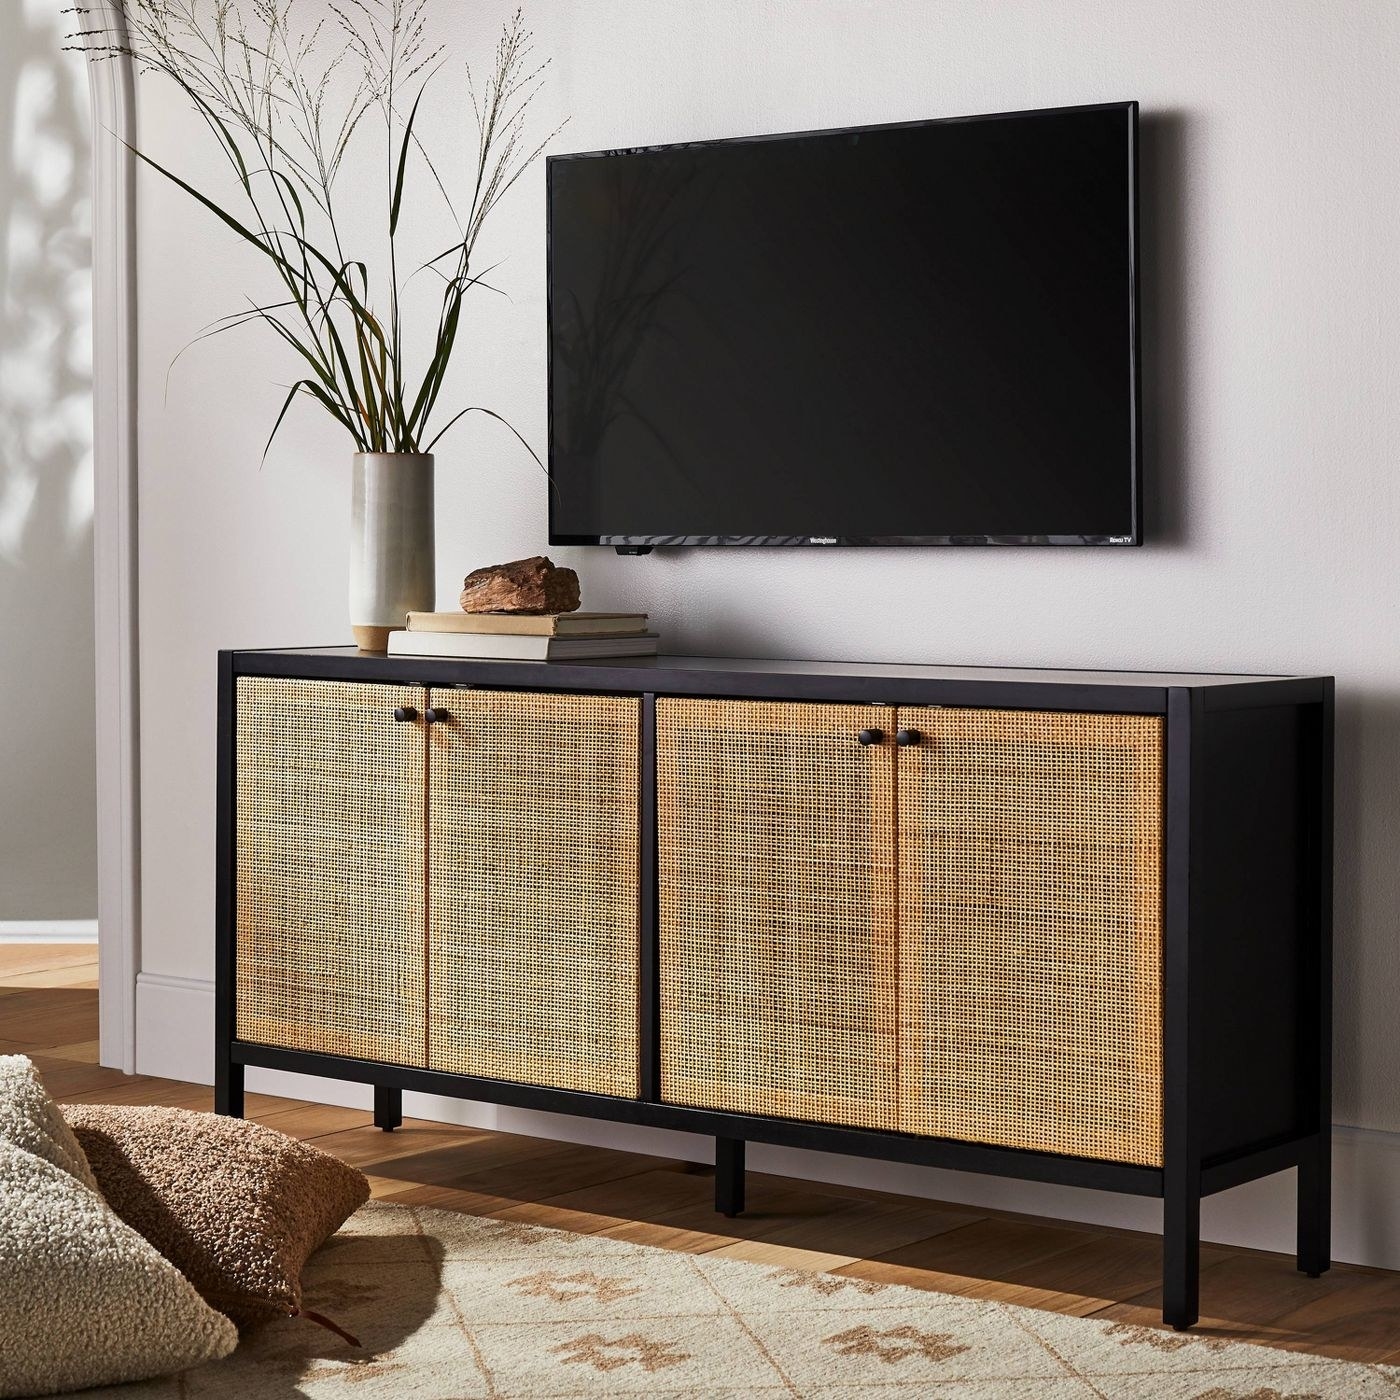 the dark TV stand with light cane doors